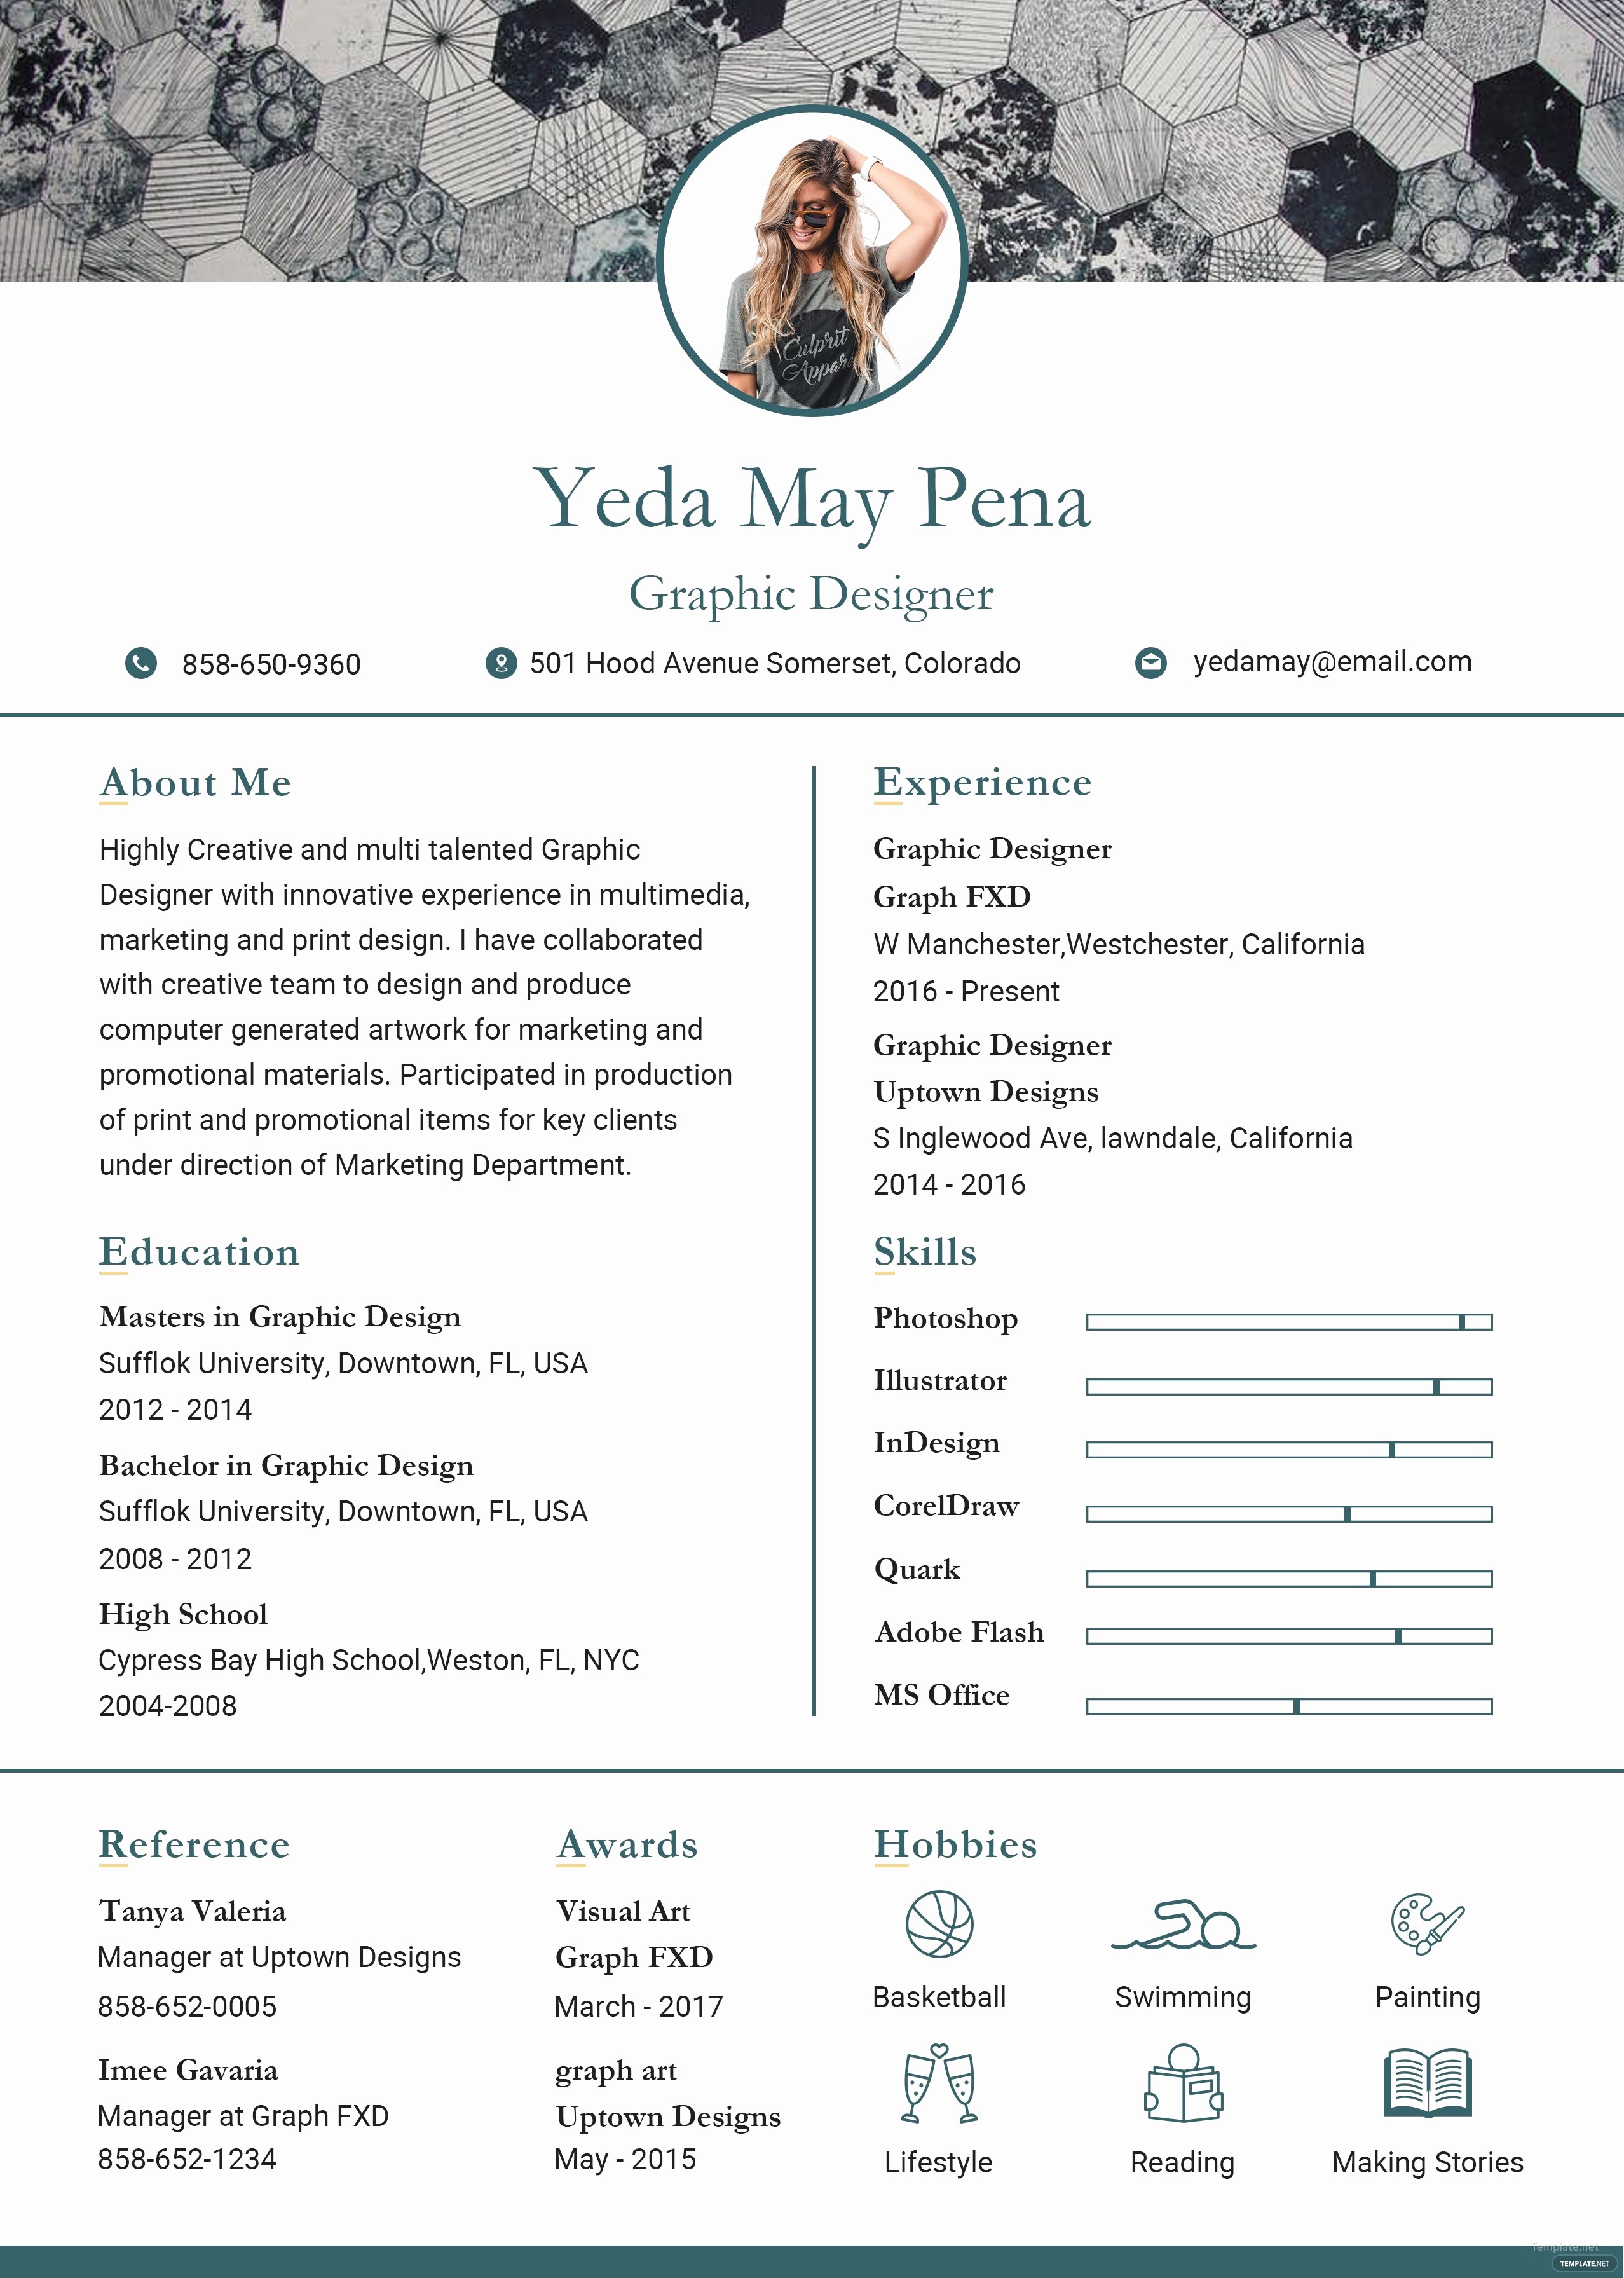 A Template for A Resume Elegant Free Modern Resume and Cv Template In Adobe Shop